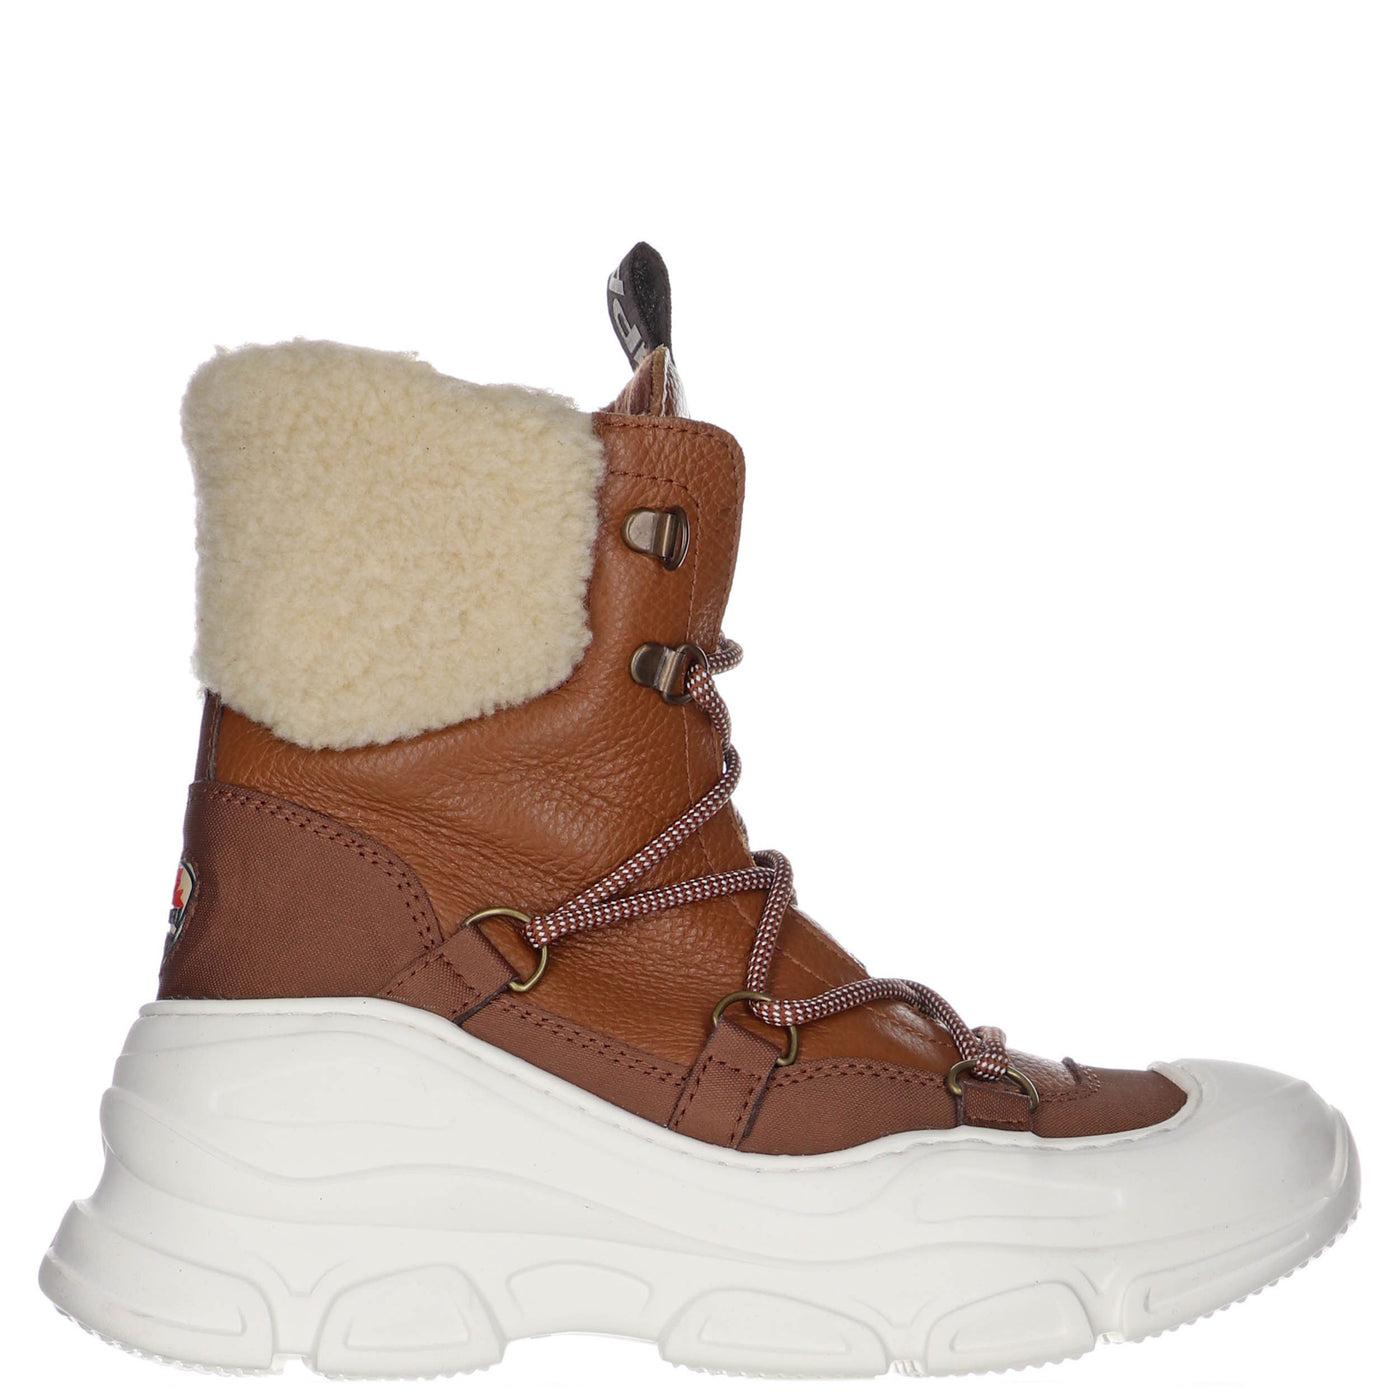 TOMS Bryce Sneaker Boots (For Women)